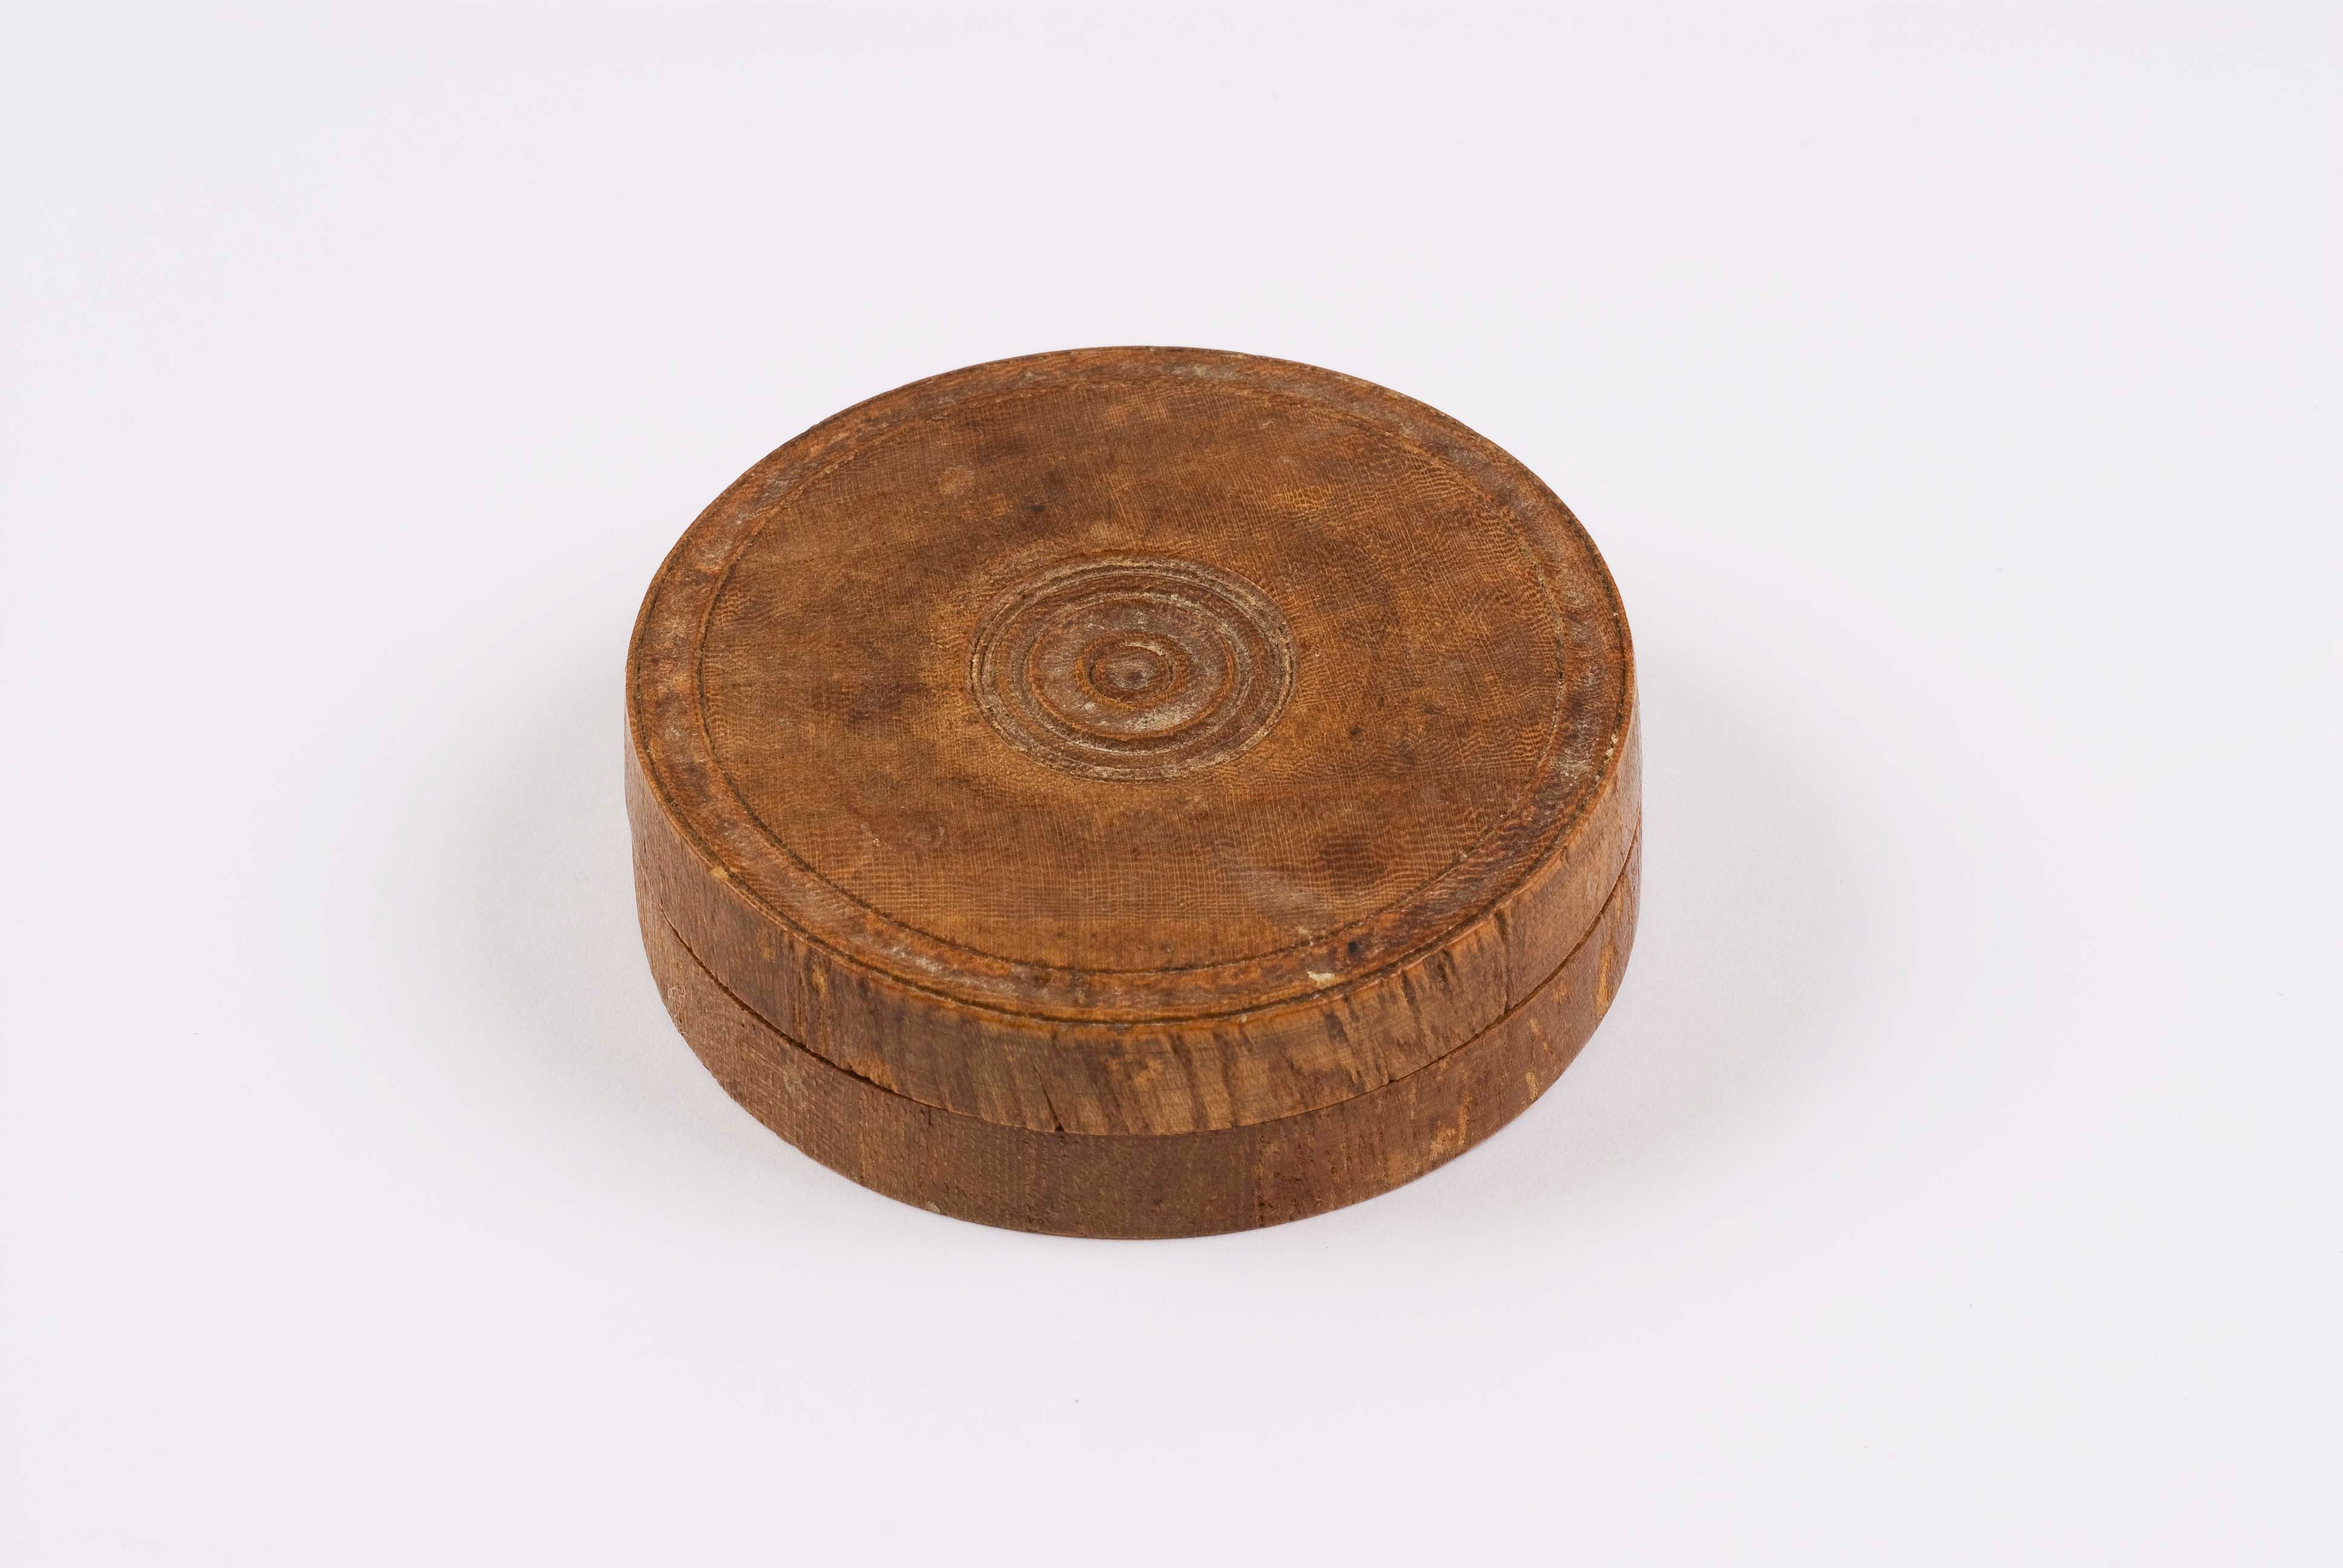 Box made from the wood of the Great Elm, witness to the Treaty of Friendship between Tamenend and Penn